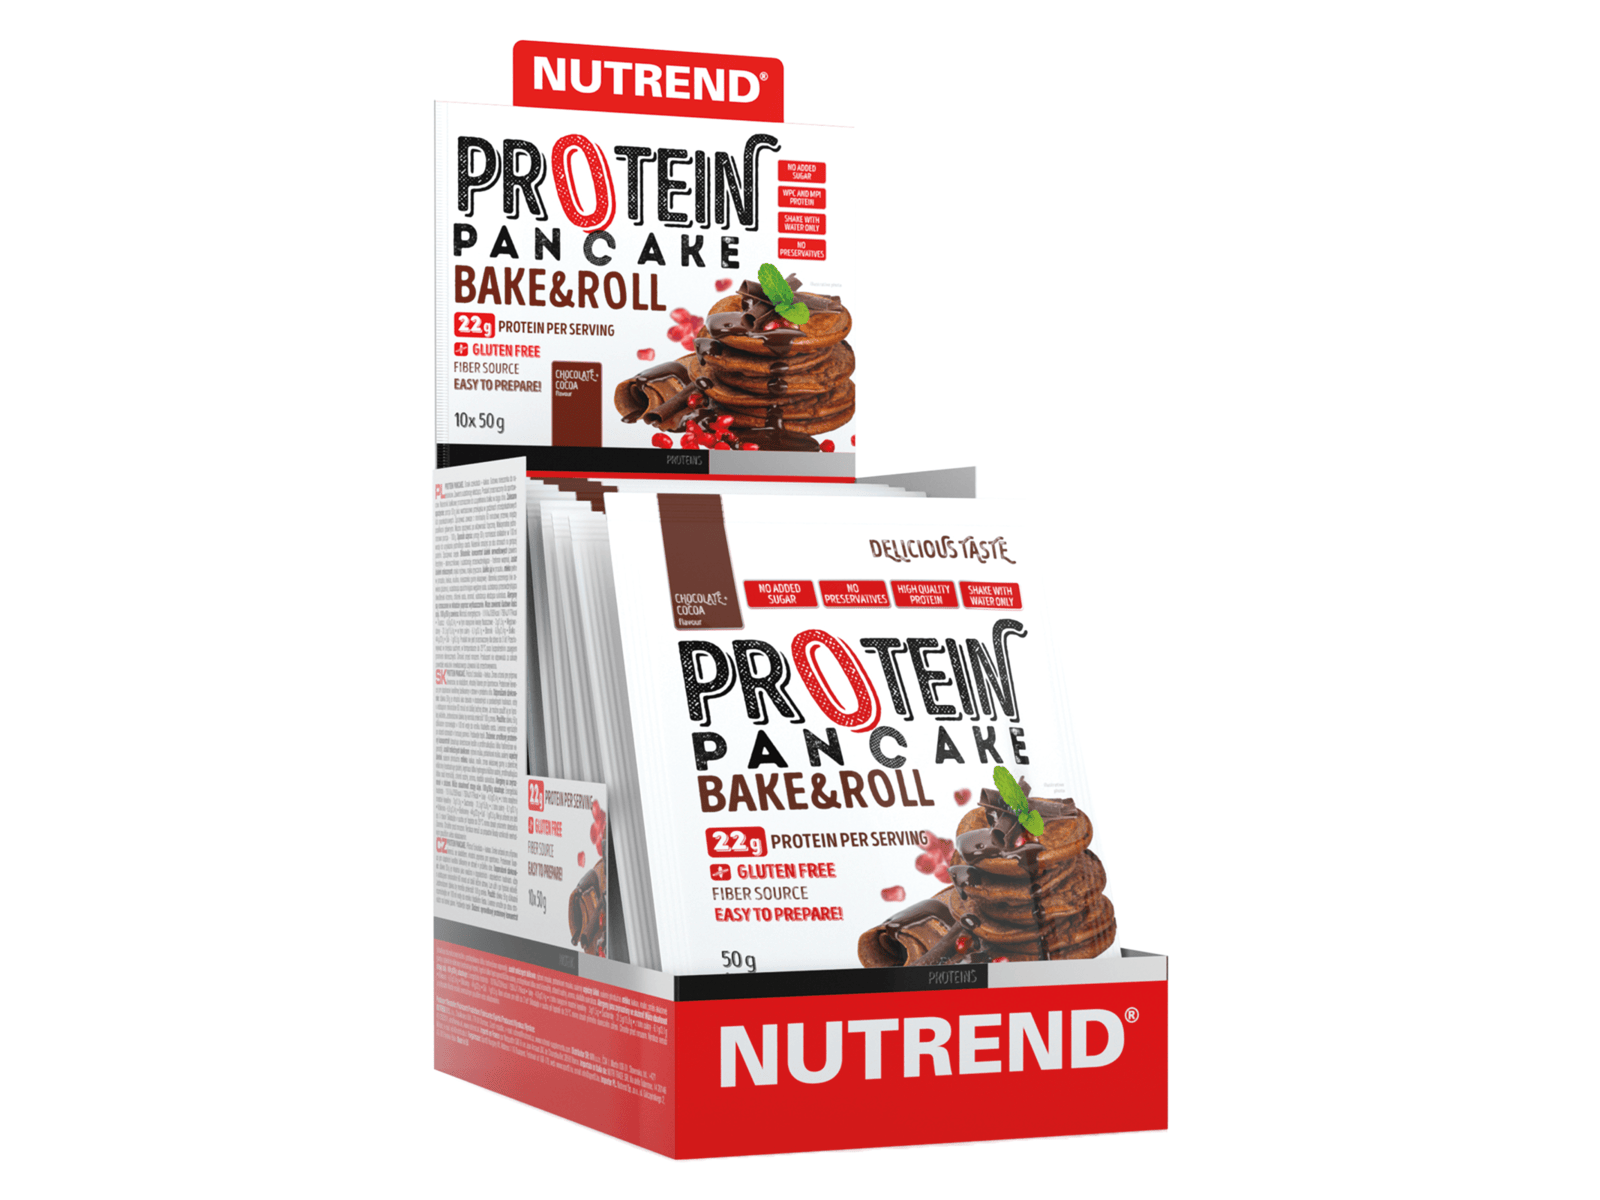 Protein Pancake Bake & Roll (Chocolate/Cocoa - 10 x 50 gram) - NUTREND